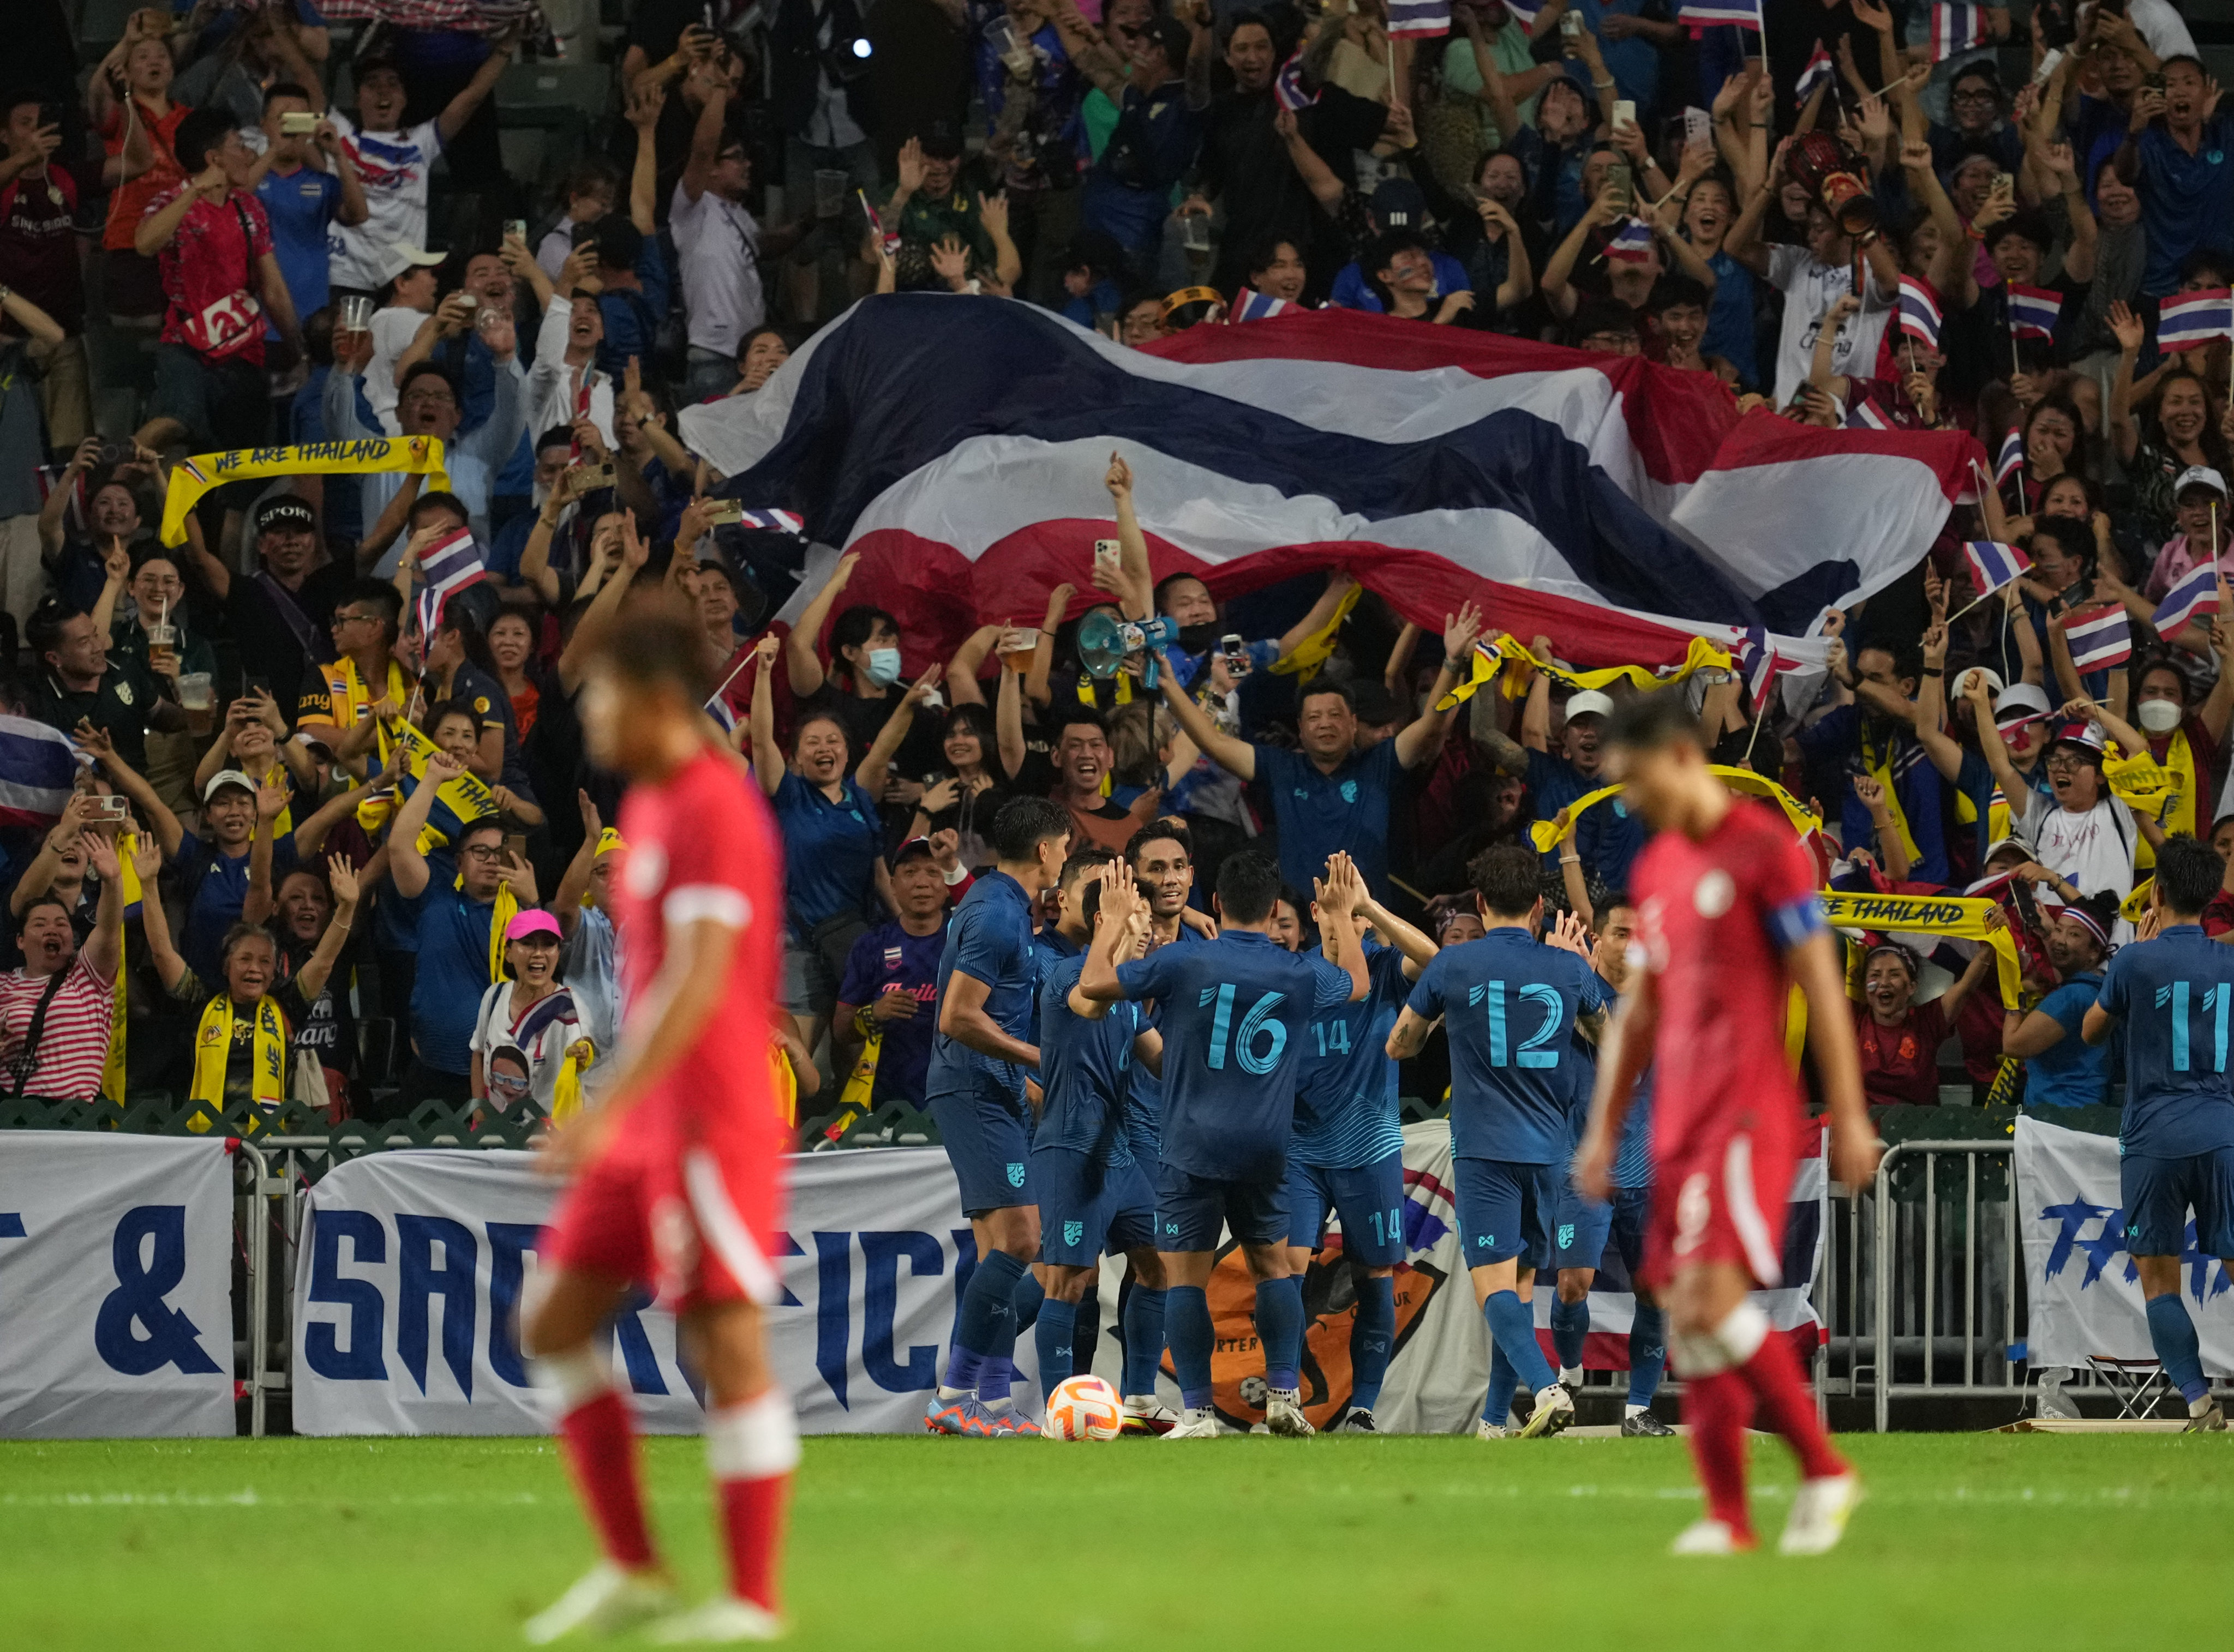 Thailand players celebrate after scoring the only goal of the game at Hong Kong Stadium. Photo: Sam Tsang